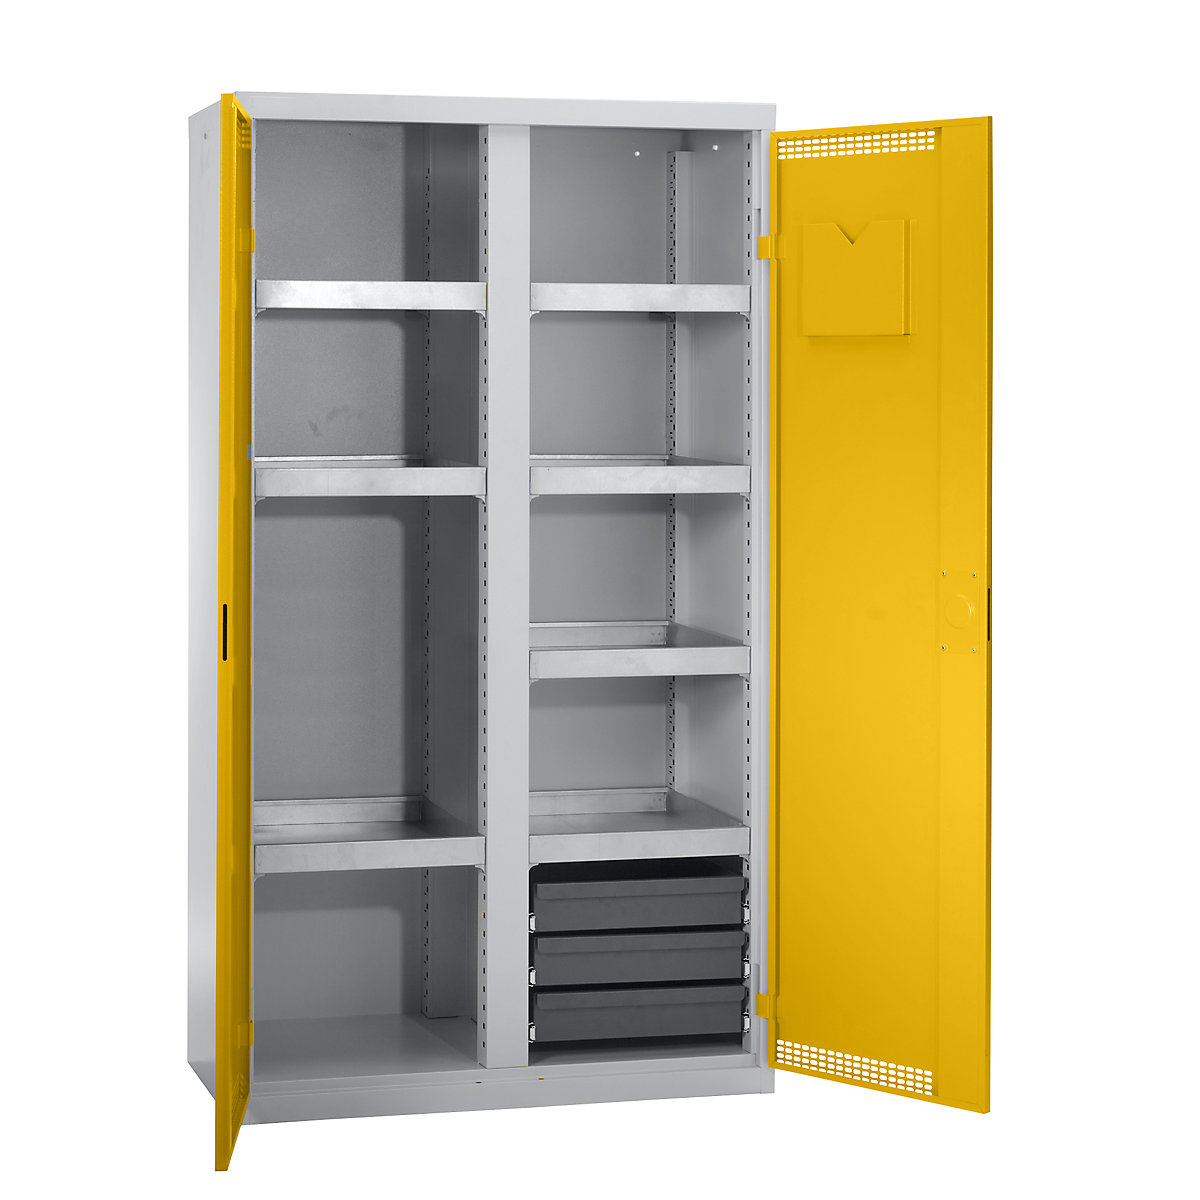 Environmental cupboard with door perforations, HxWxD 1800 x 1000 x 500 mm, 7 tray shelves, light grey / signal yellow-5